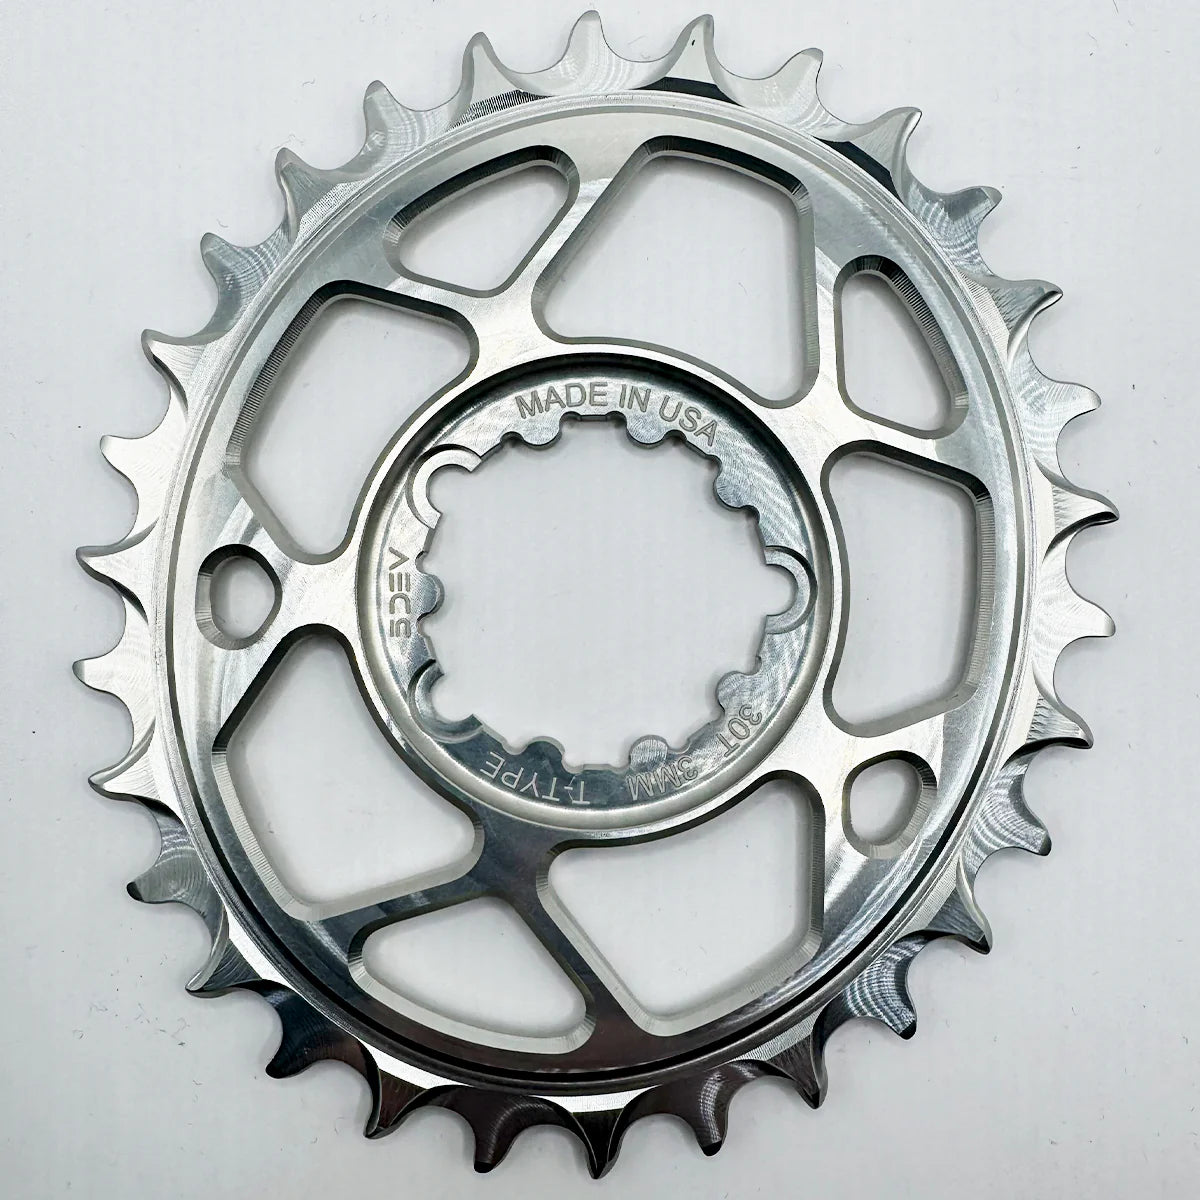 5Dev 3-Bolt Direct Mount T-Type Oval Chainring